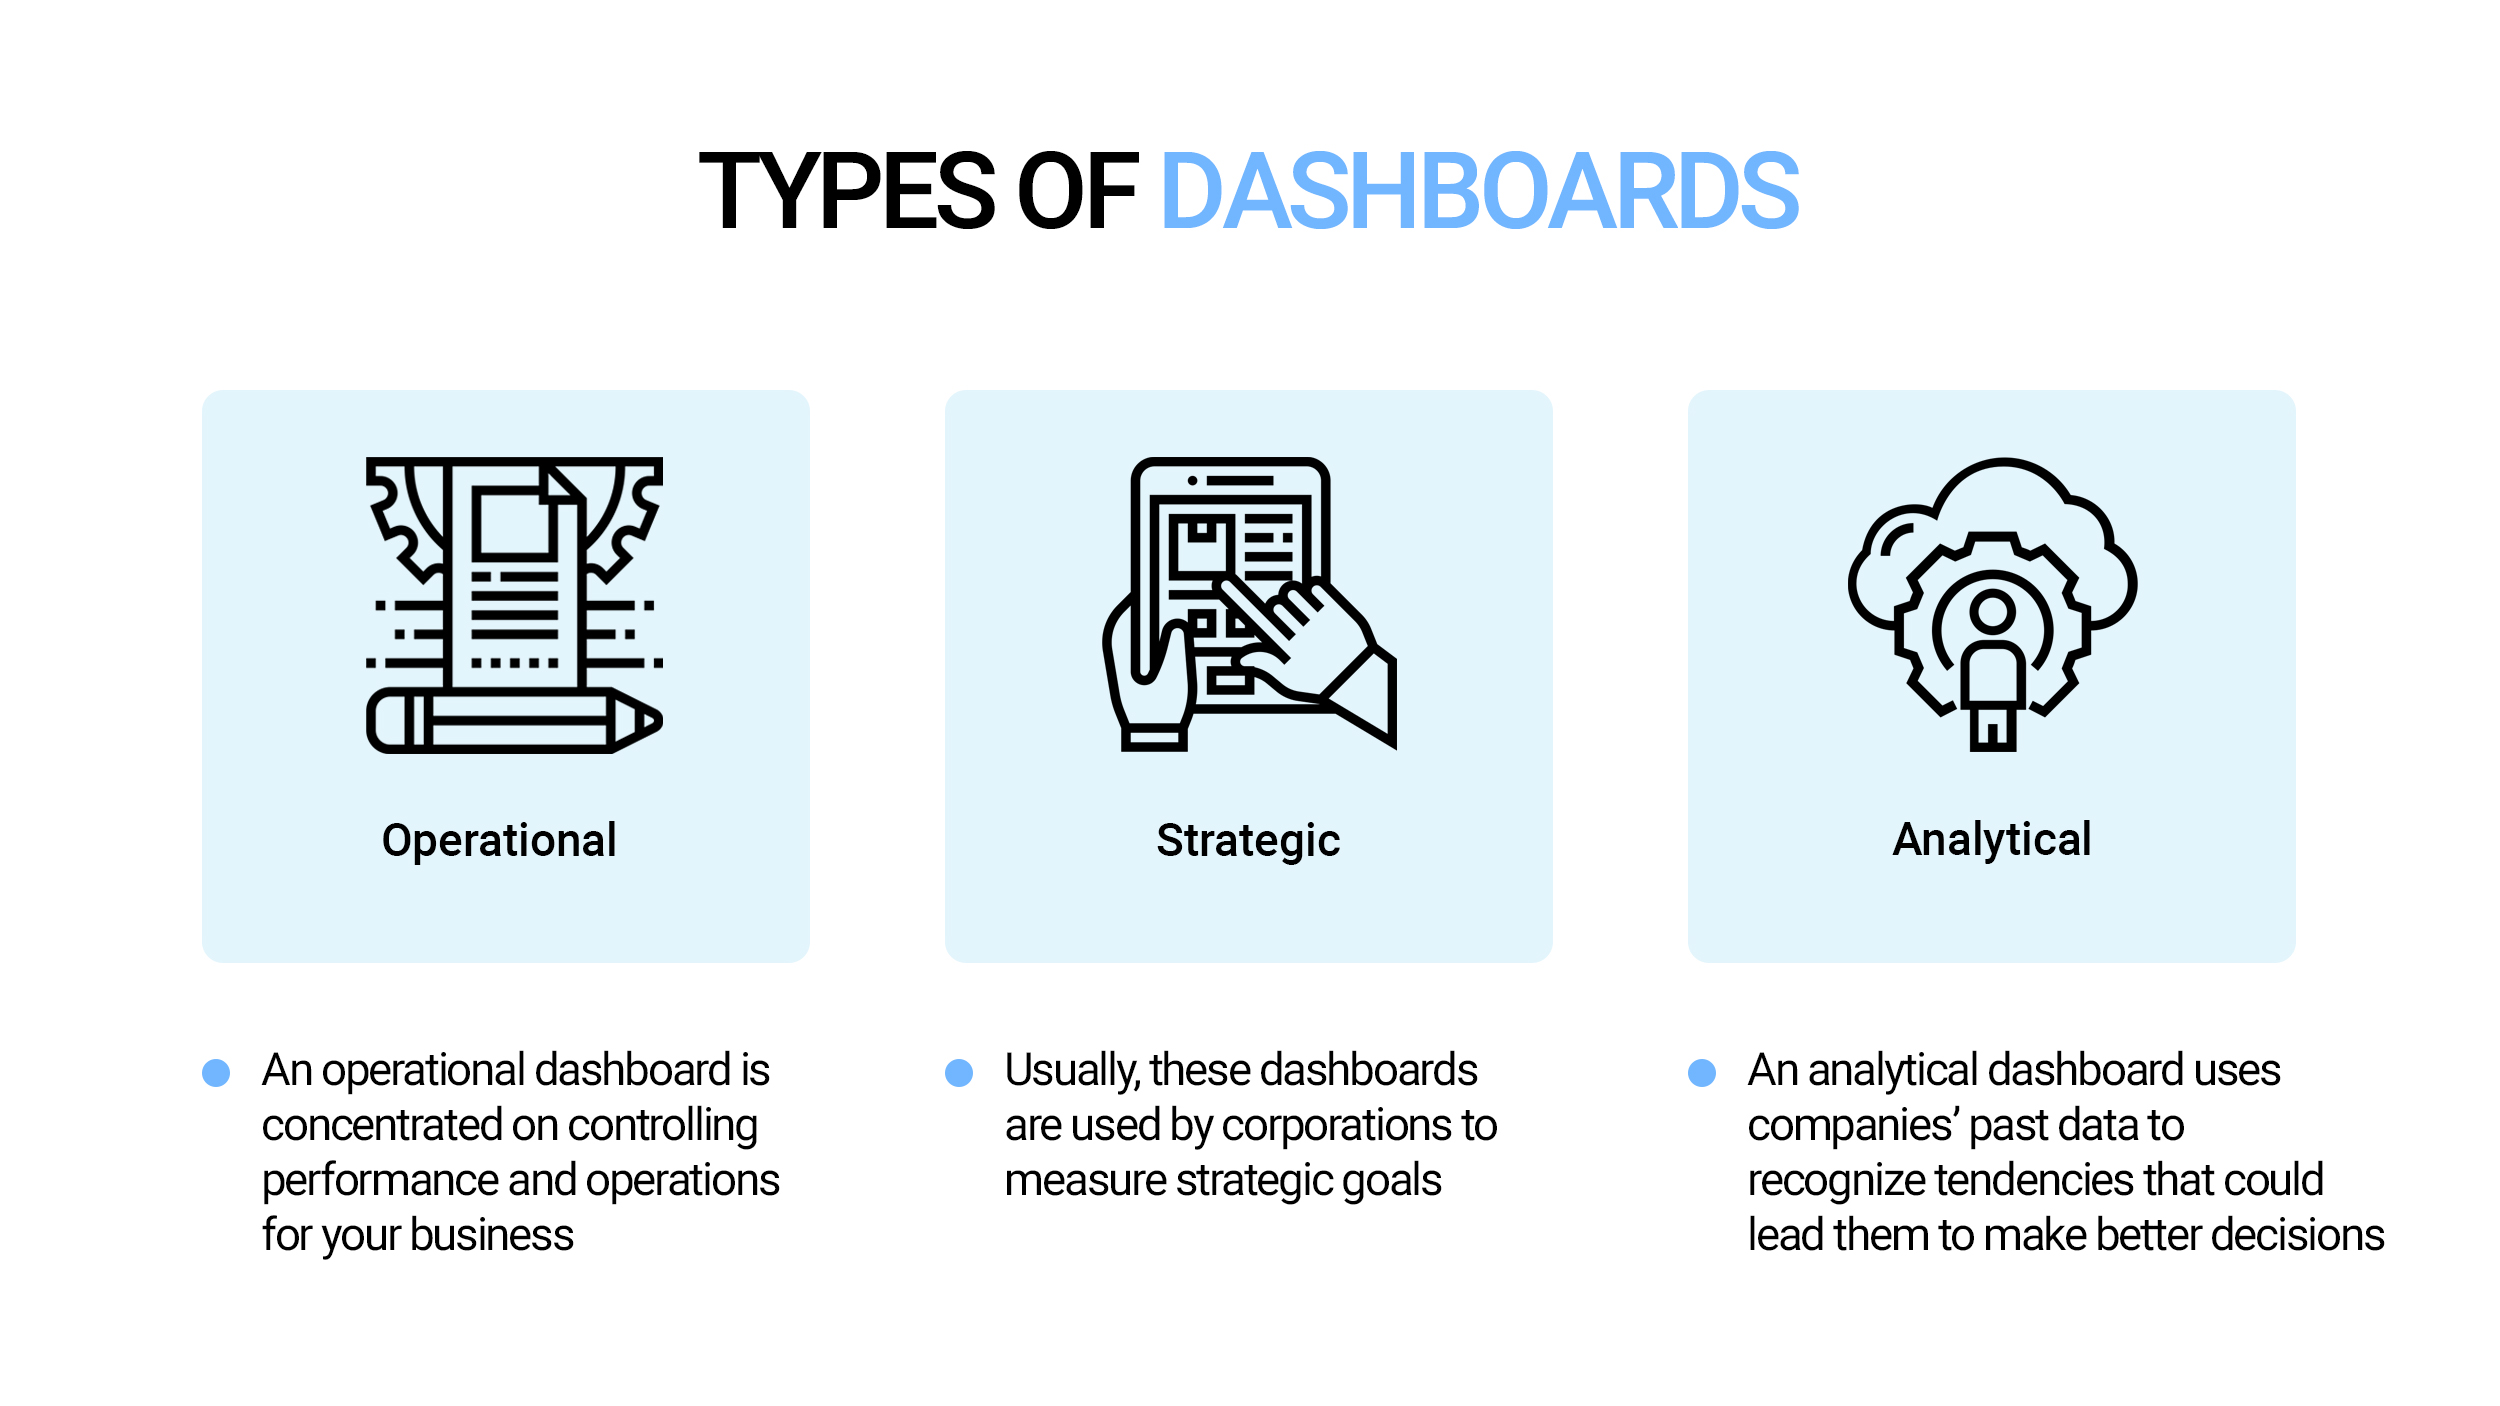 Types of dashboards